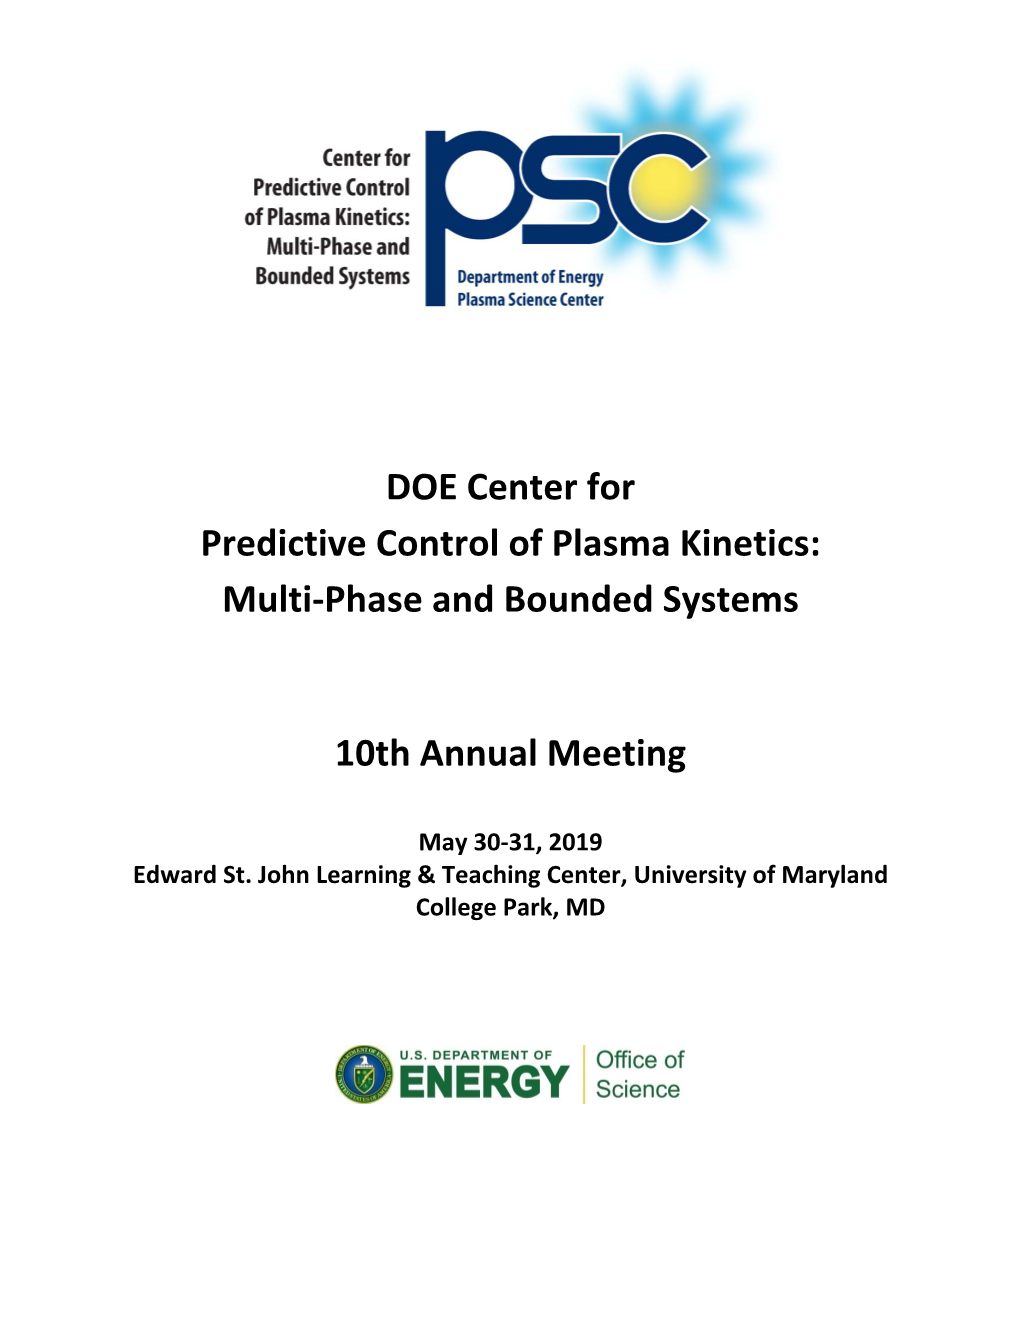 DOE Center for Predictive Control of Plasma Kinetics: Multi-Phase And